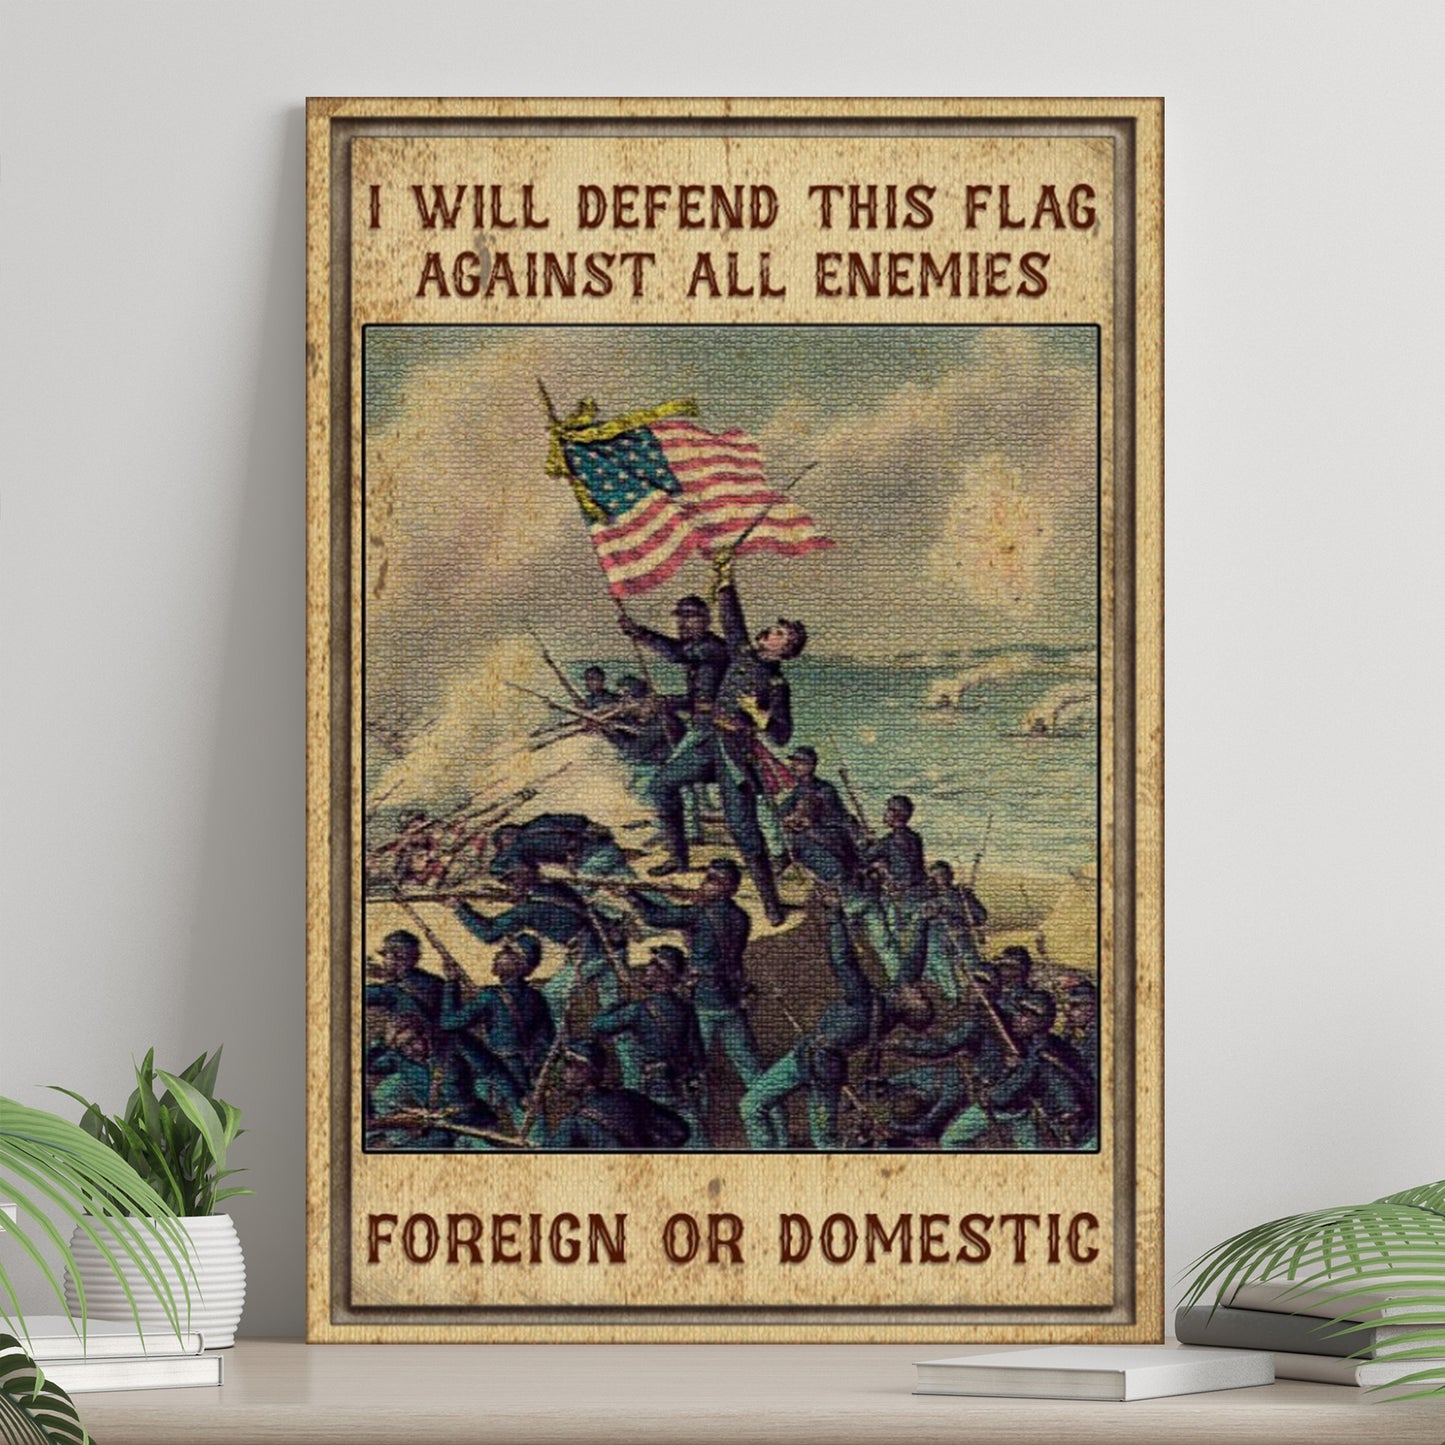 Defend This Flag Sign - Image by Tailored Canvases